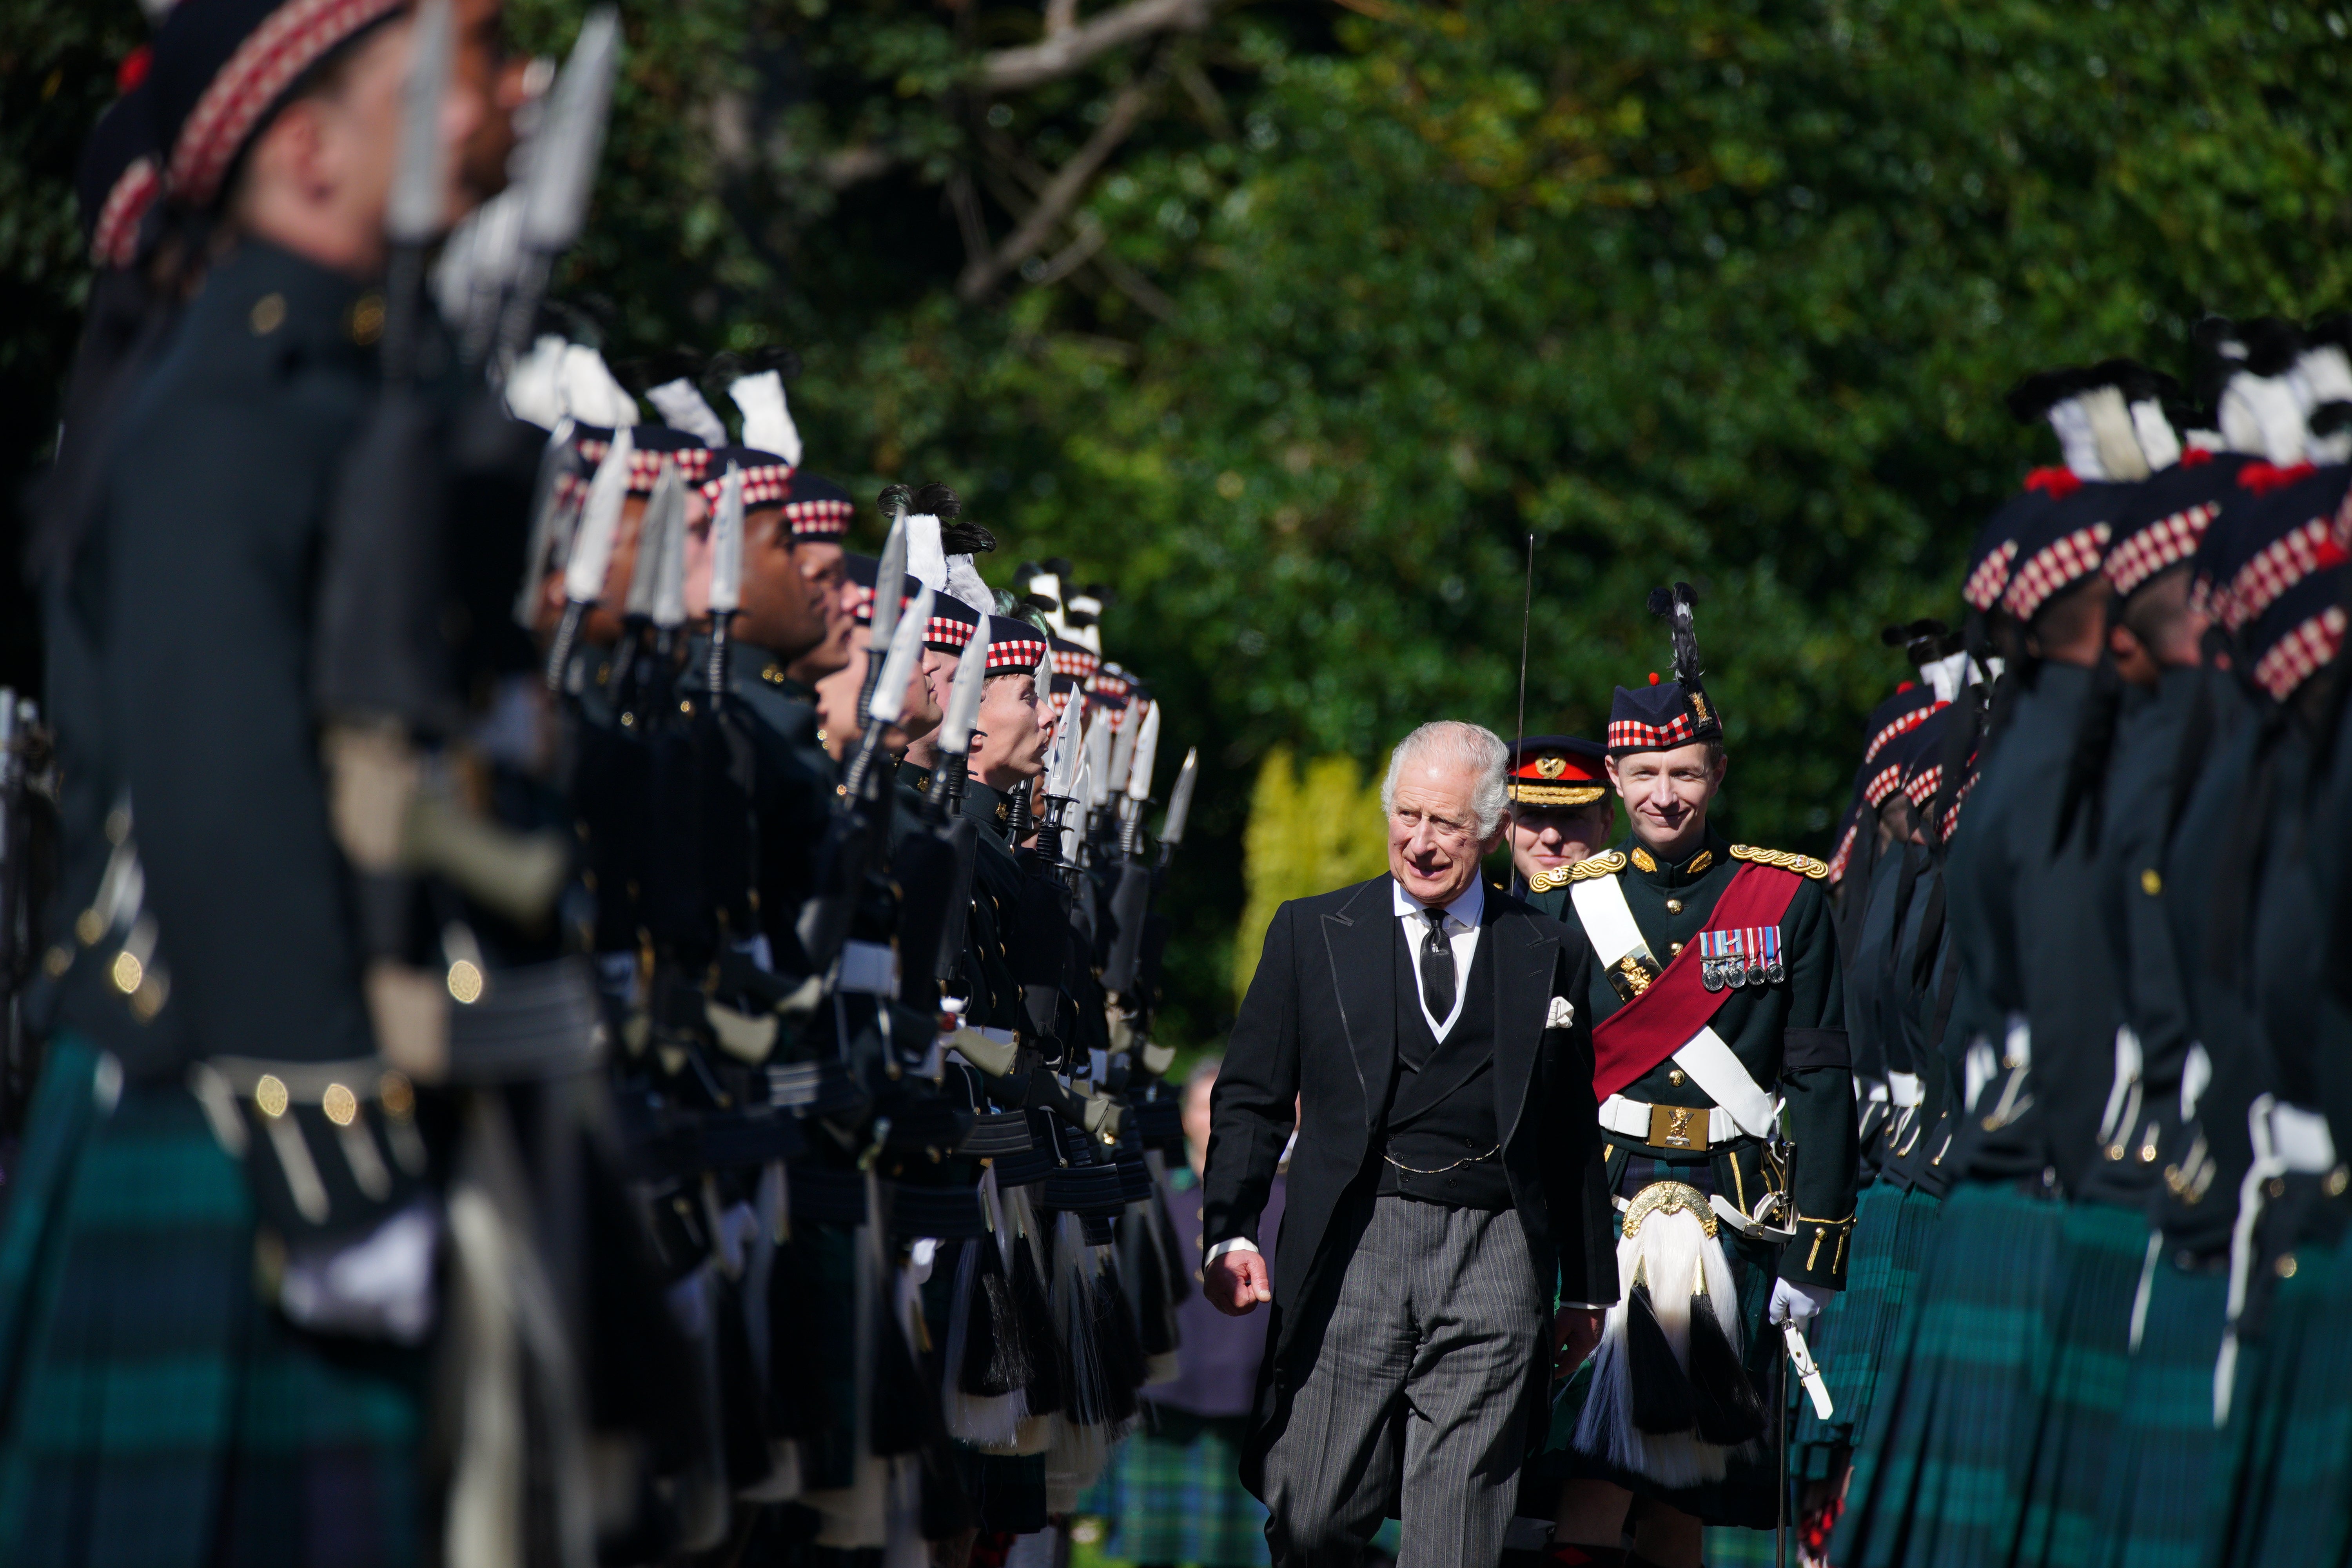 King Charles III inspects the Guard of Honour as he takes part in the Ceremony of the Keys at the Palace of Holyroodhouse (Peter Byrne/PA)